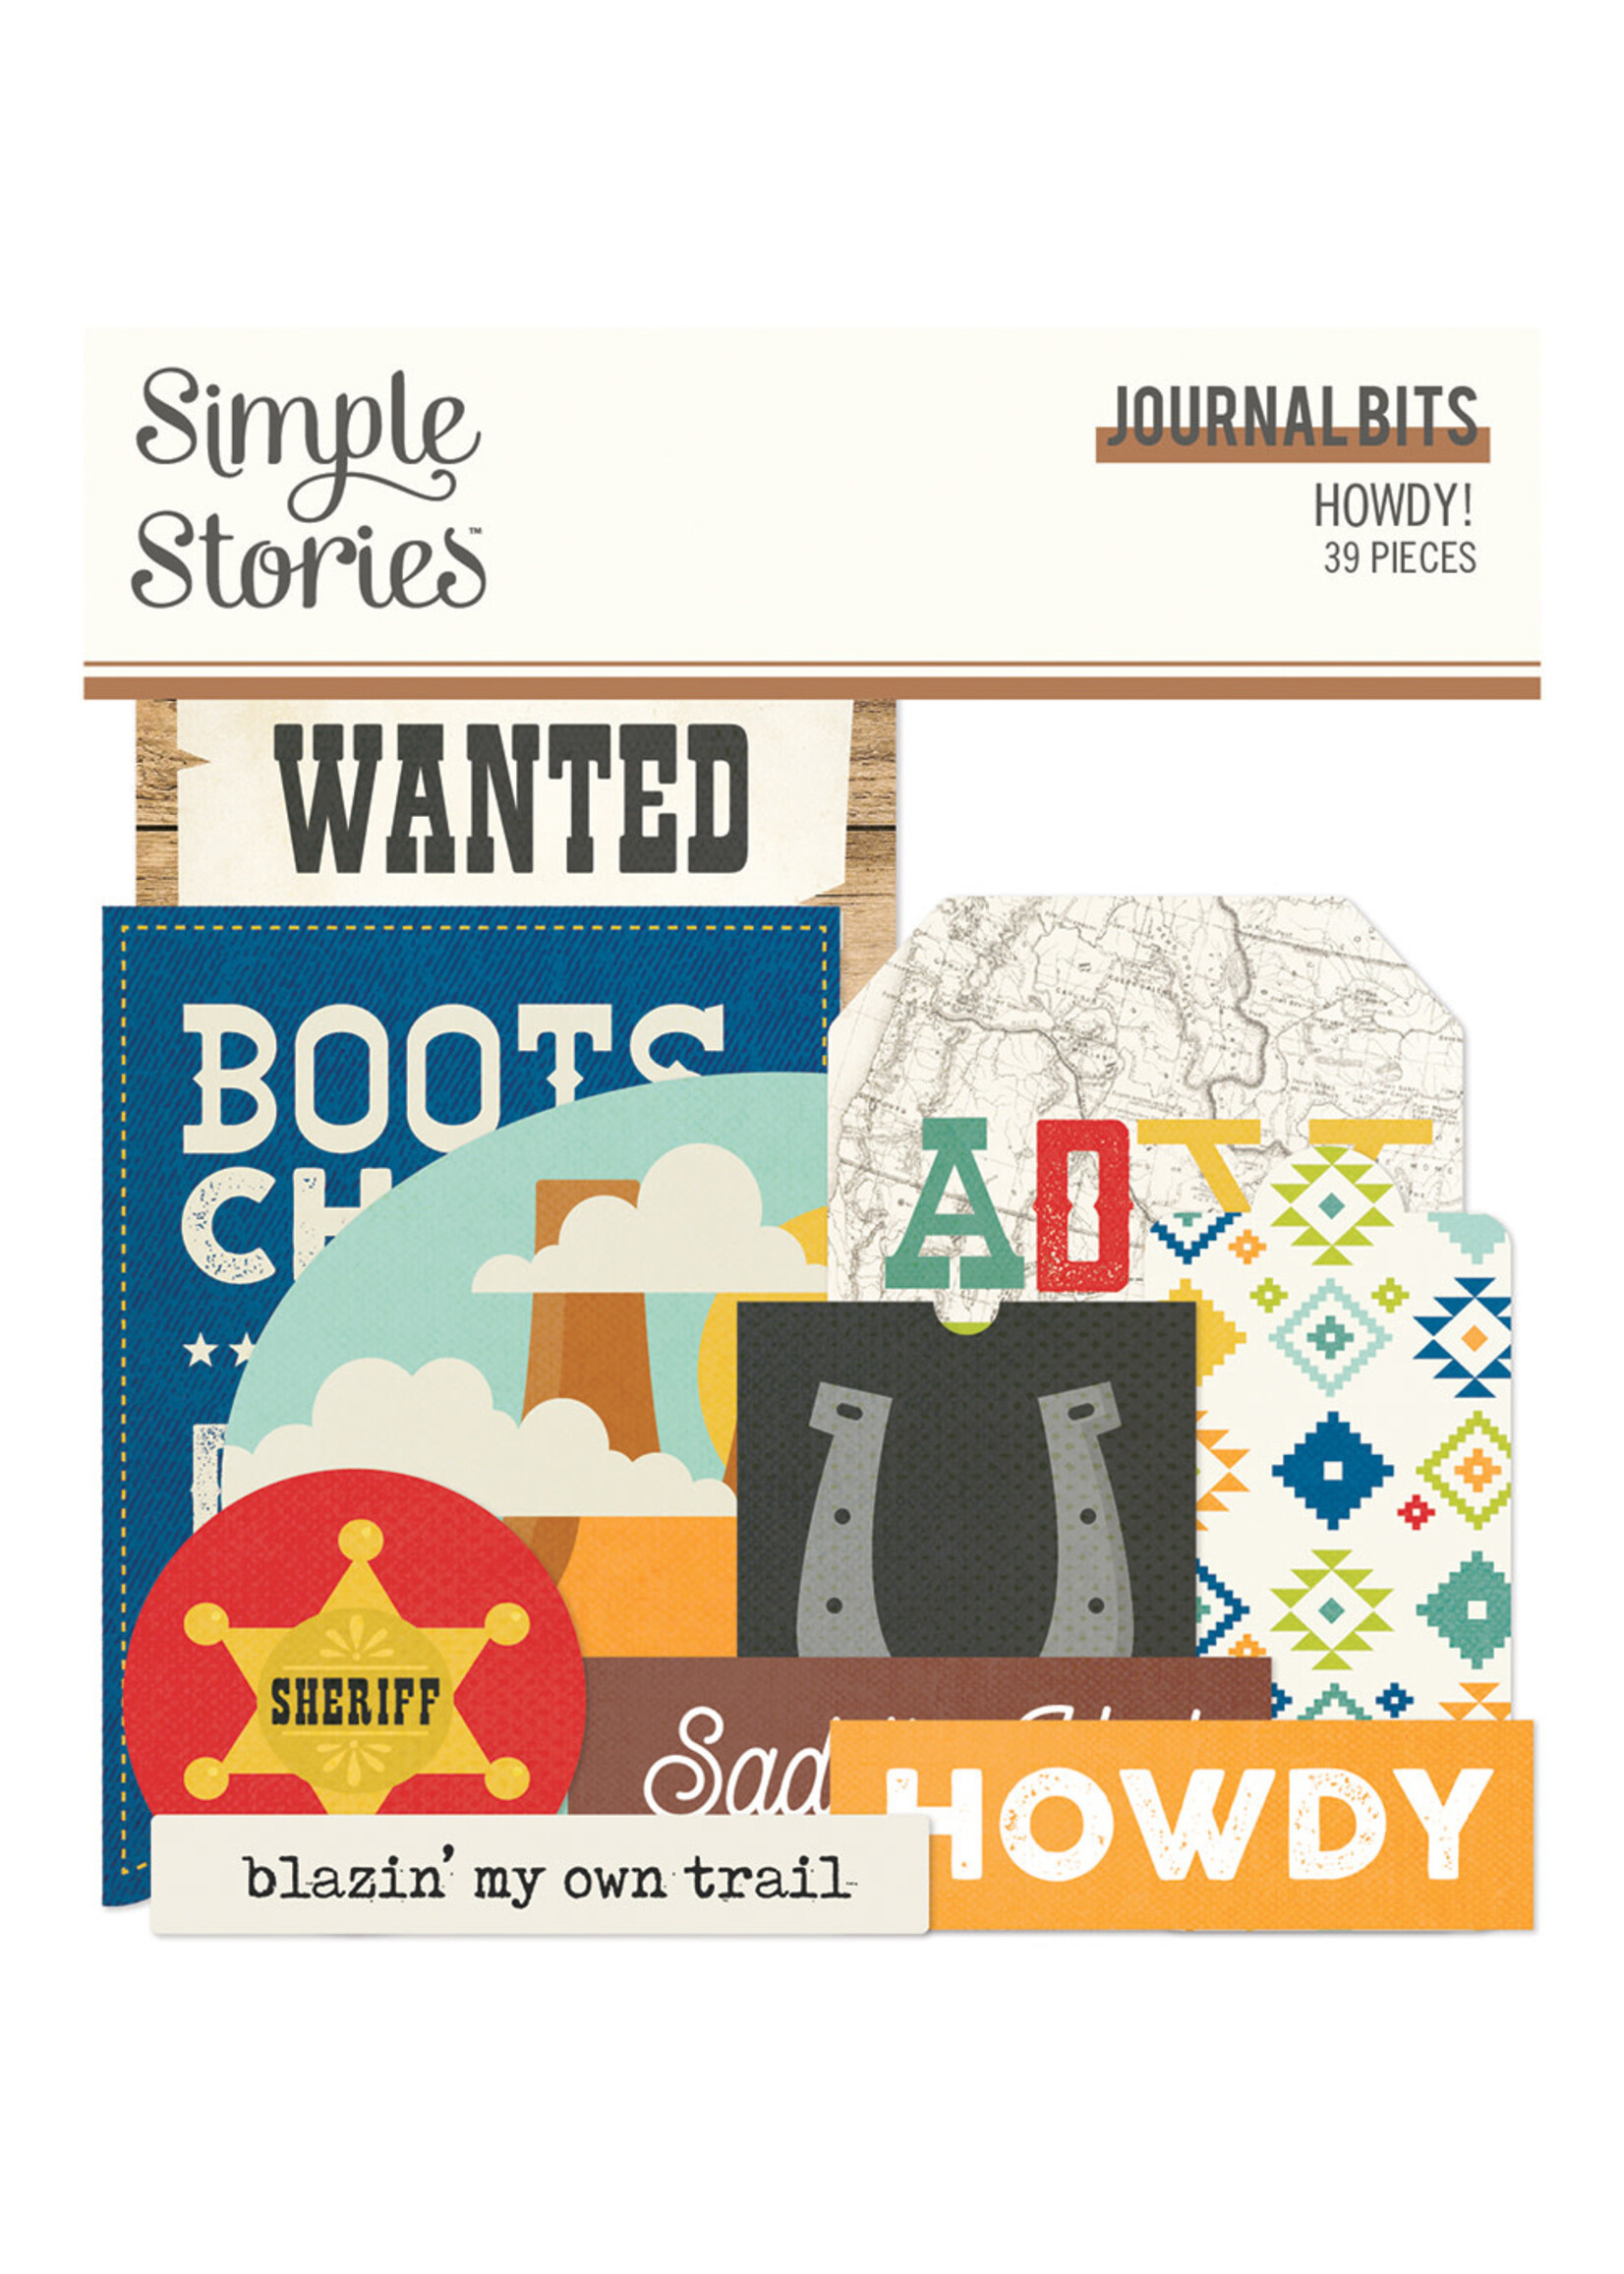 Simple Stories Howdy! - Journal Bits